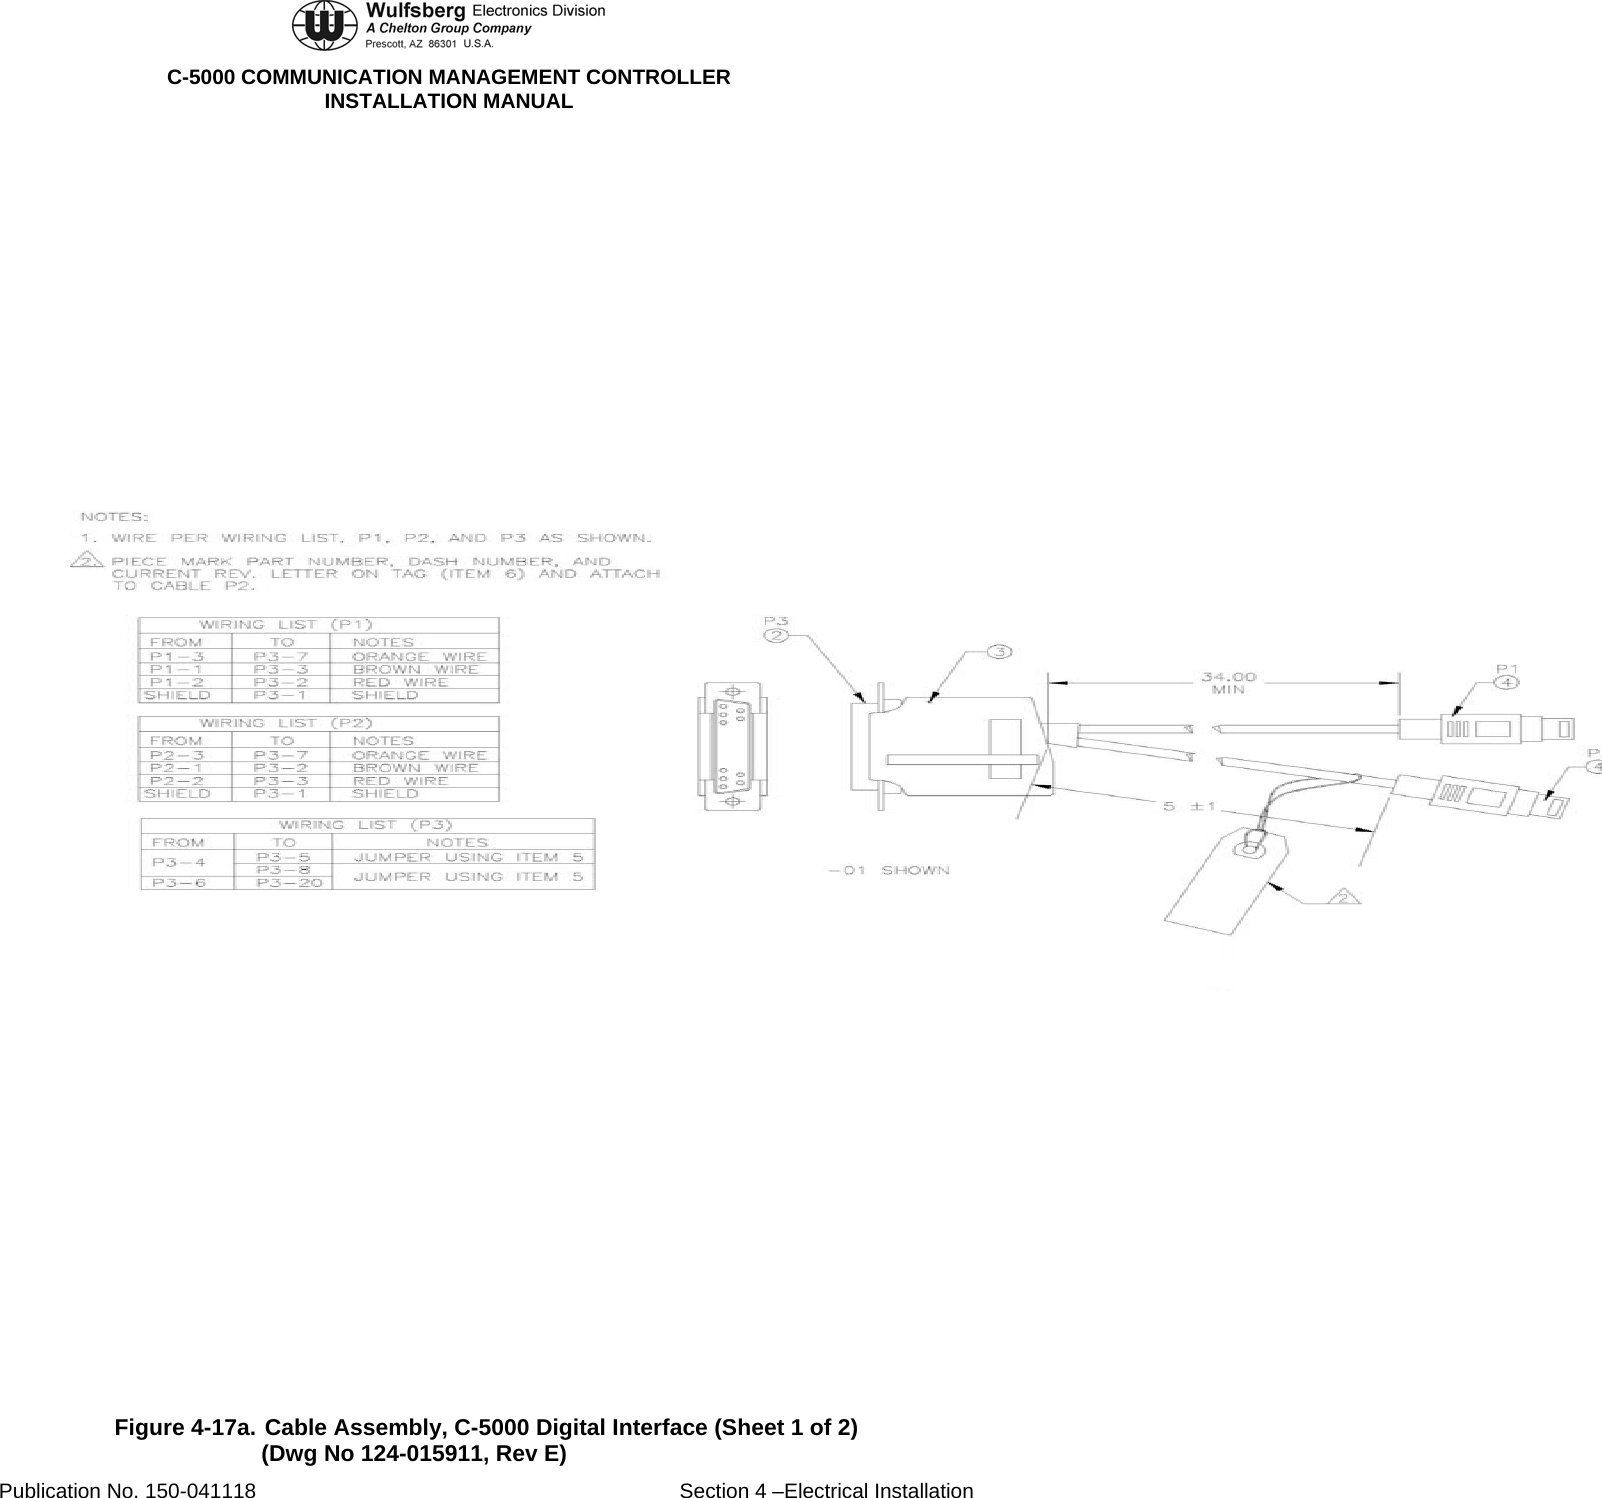  C-5000 COMMUNICATION MANAGEMENT CONTROLLER INSTALLATION MANUAL Publication No. 150-041118  Section 4 –Electrical Installation  Figure 4-17a. Cable Assembly, C-5000 Digital Interface (Sheet 1 of 2) (Dwg No 124-015911, Rev E) 